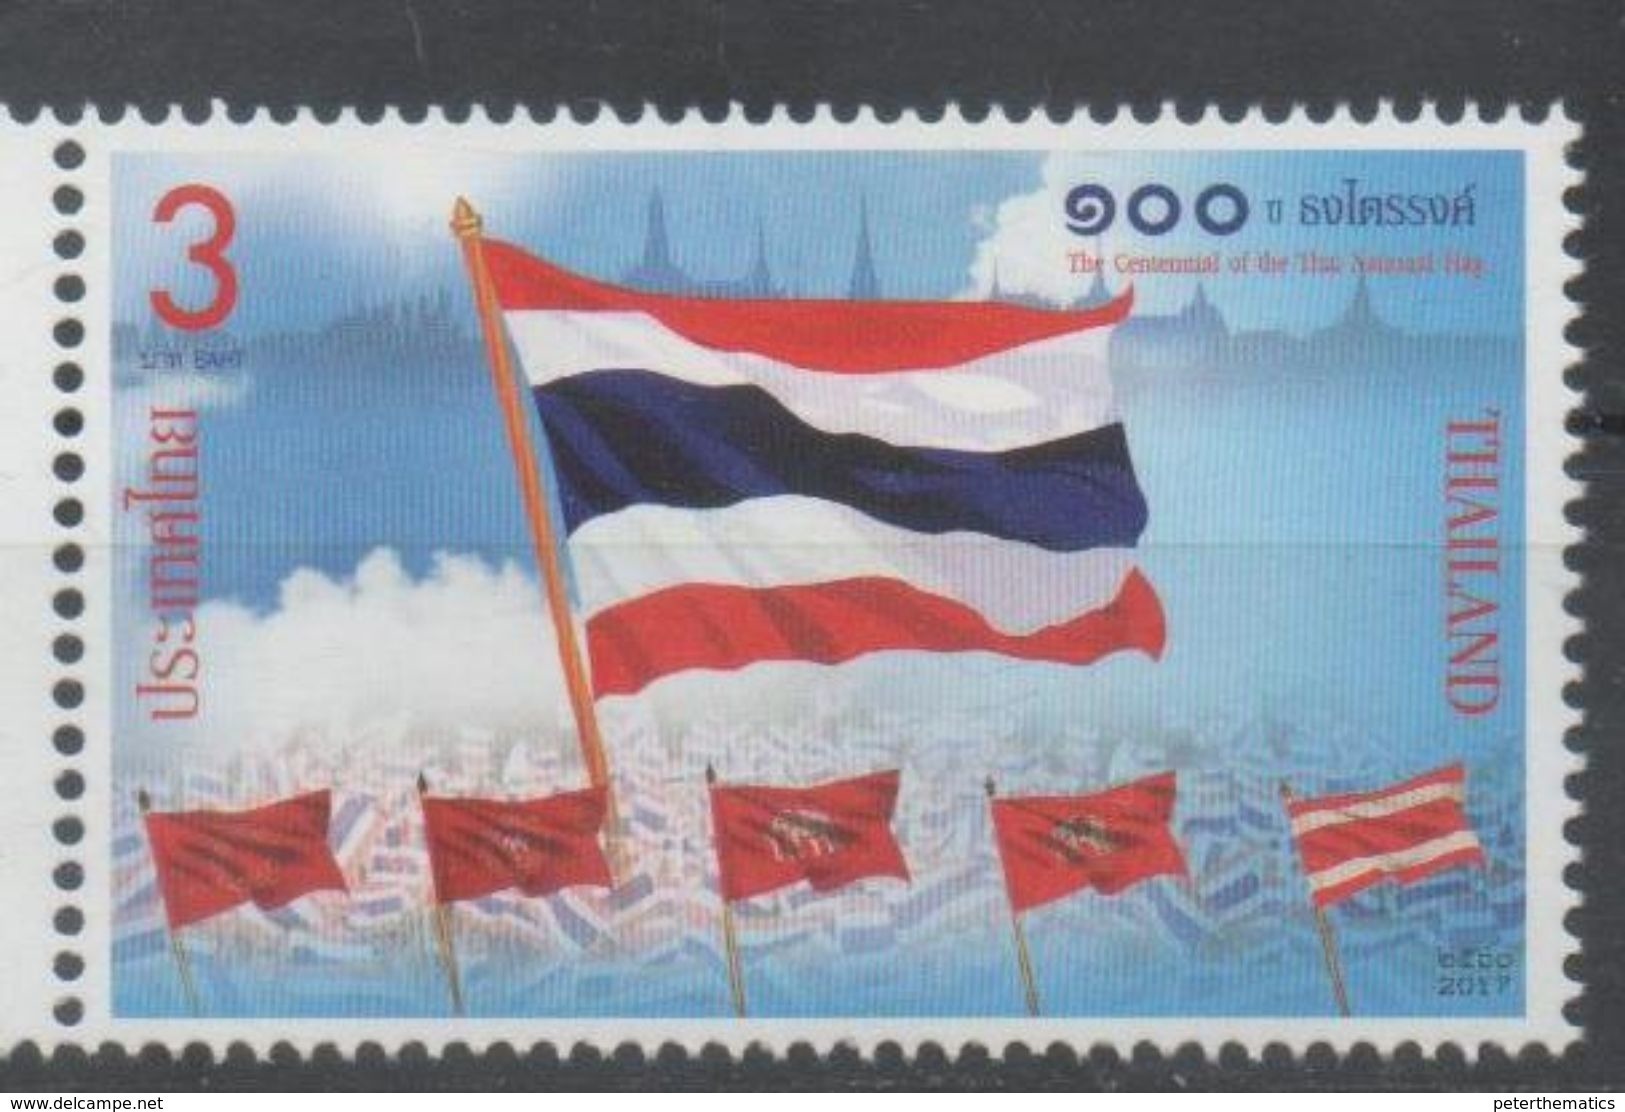 THAILAND, 2017, MNH, FLAGS, CENTENIAL OF THE THAI FLAG ,1v - Stamps